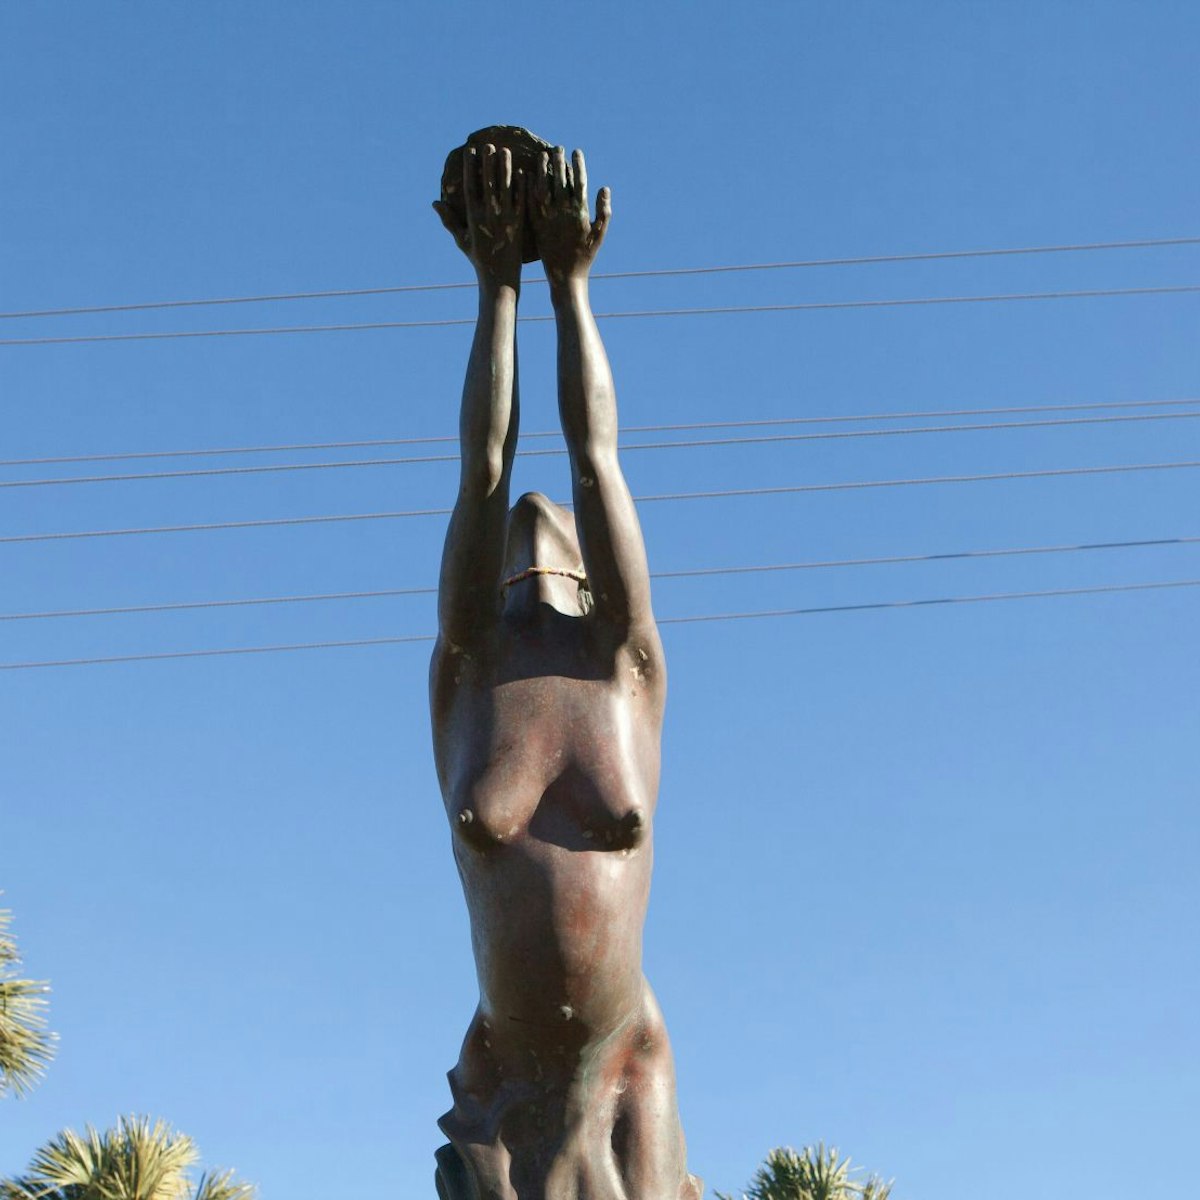 CWNCD8 Statue to the forgotten women of the pearling industry in Broome, Western Australia

Women of Pearling
